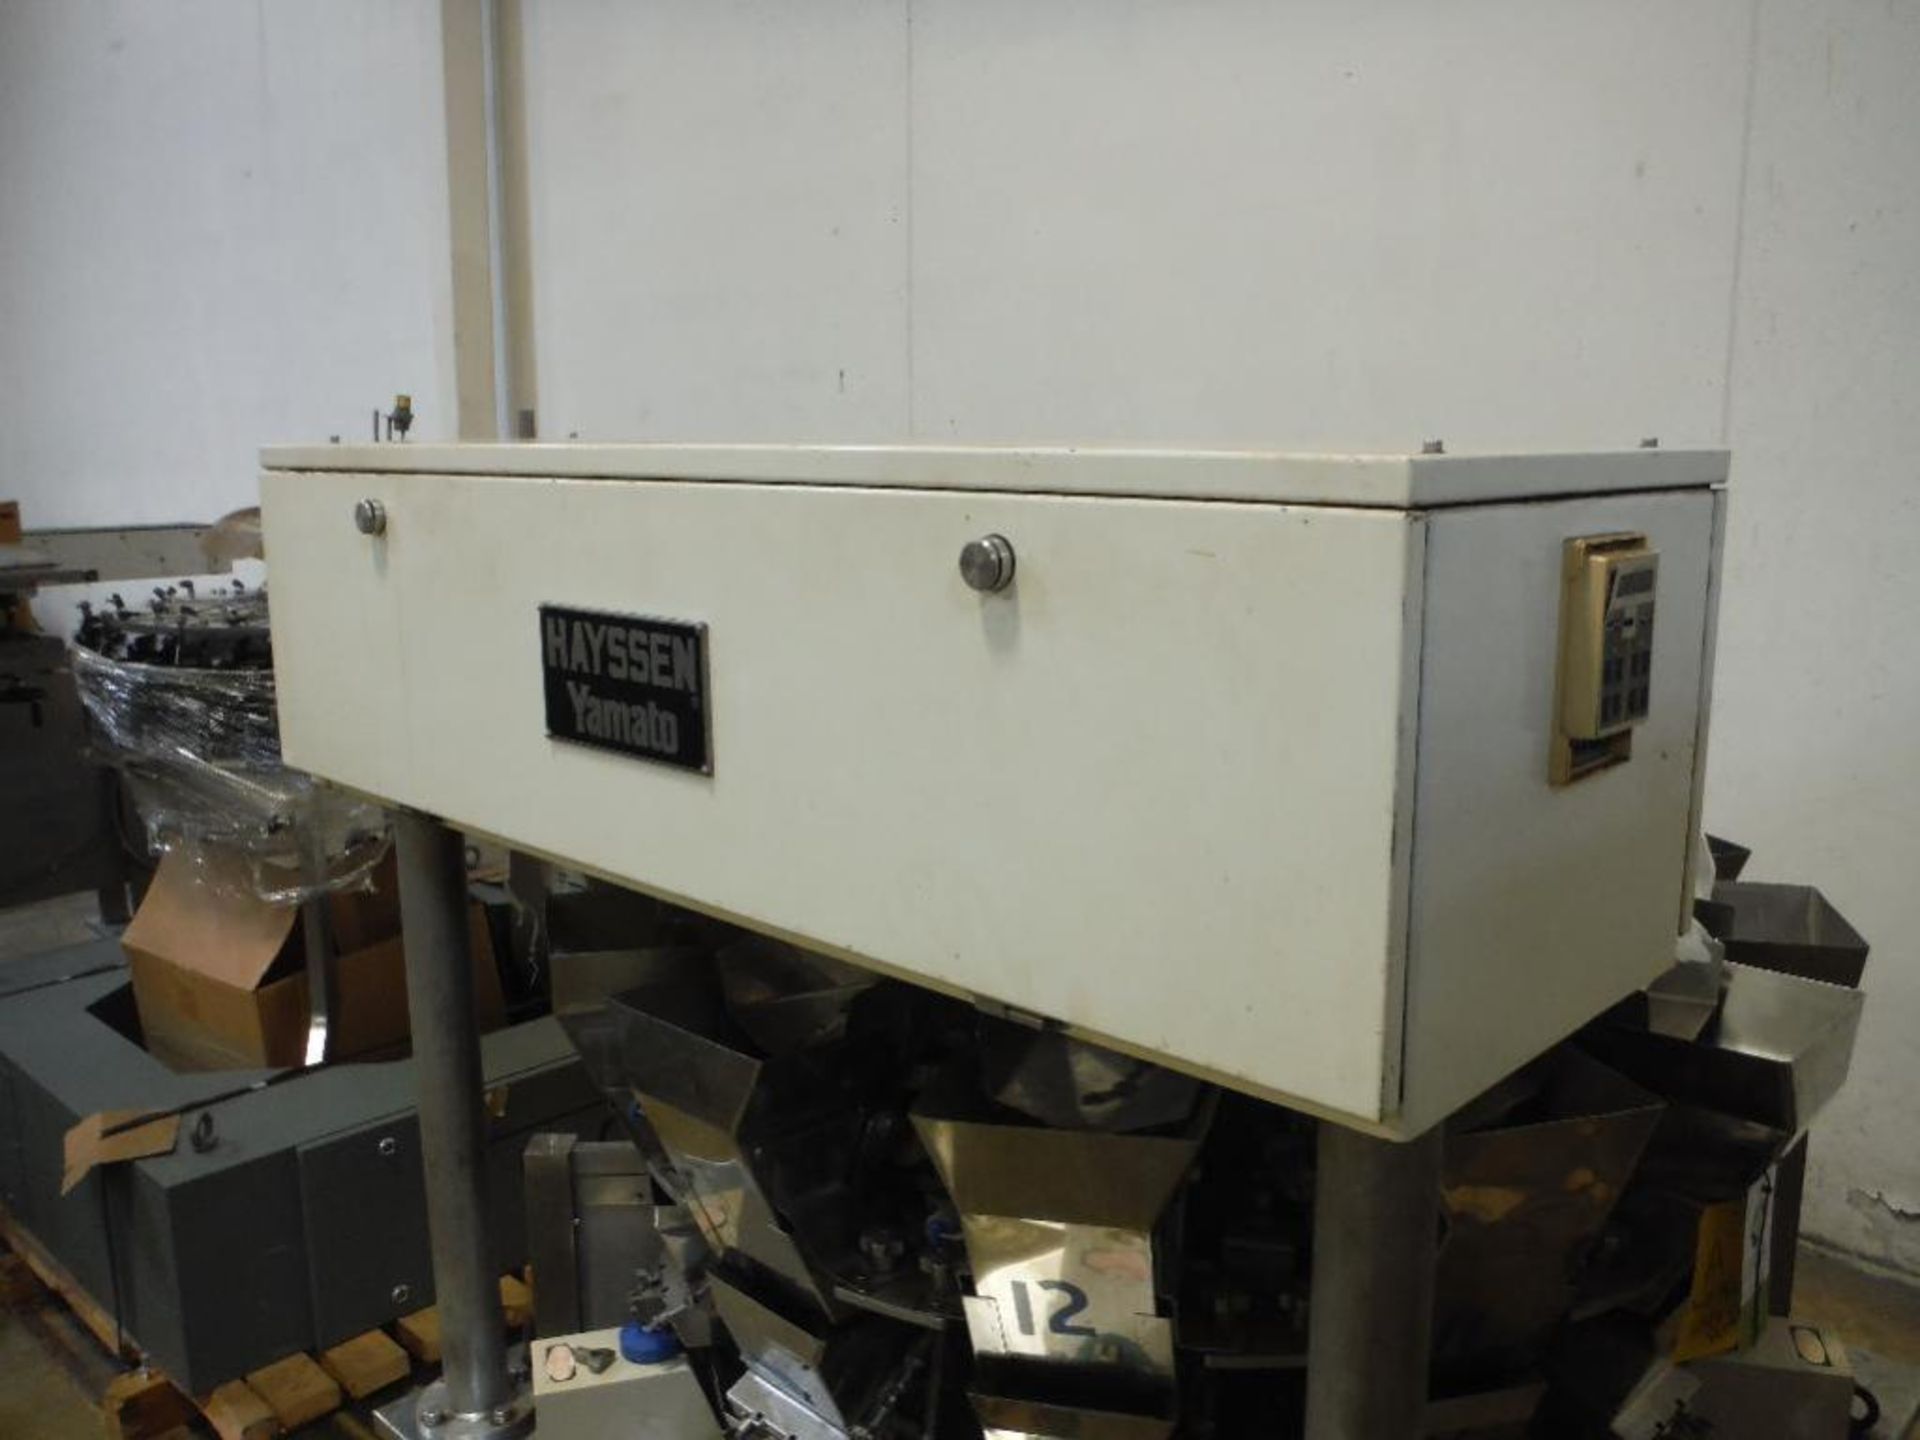 1983 Hayssen Yamato 12 head rotary scale, Model ADW221R, SN 83282, 14g to 500g range, with legs ** R - Image 5 of 10